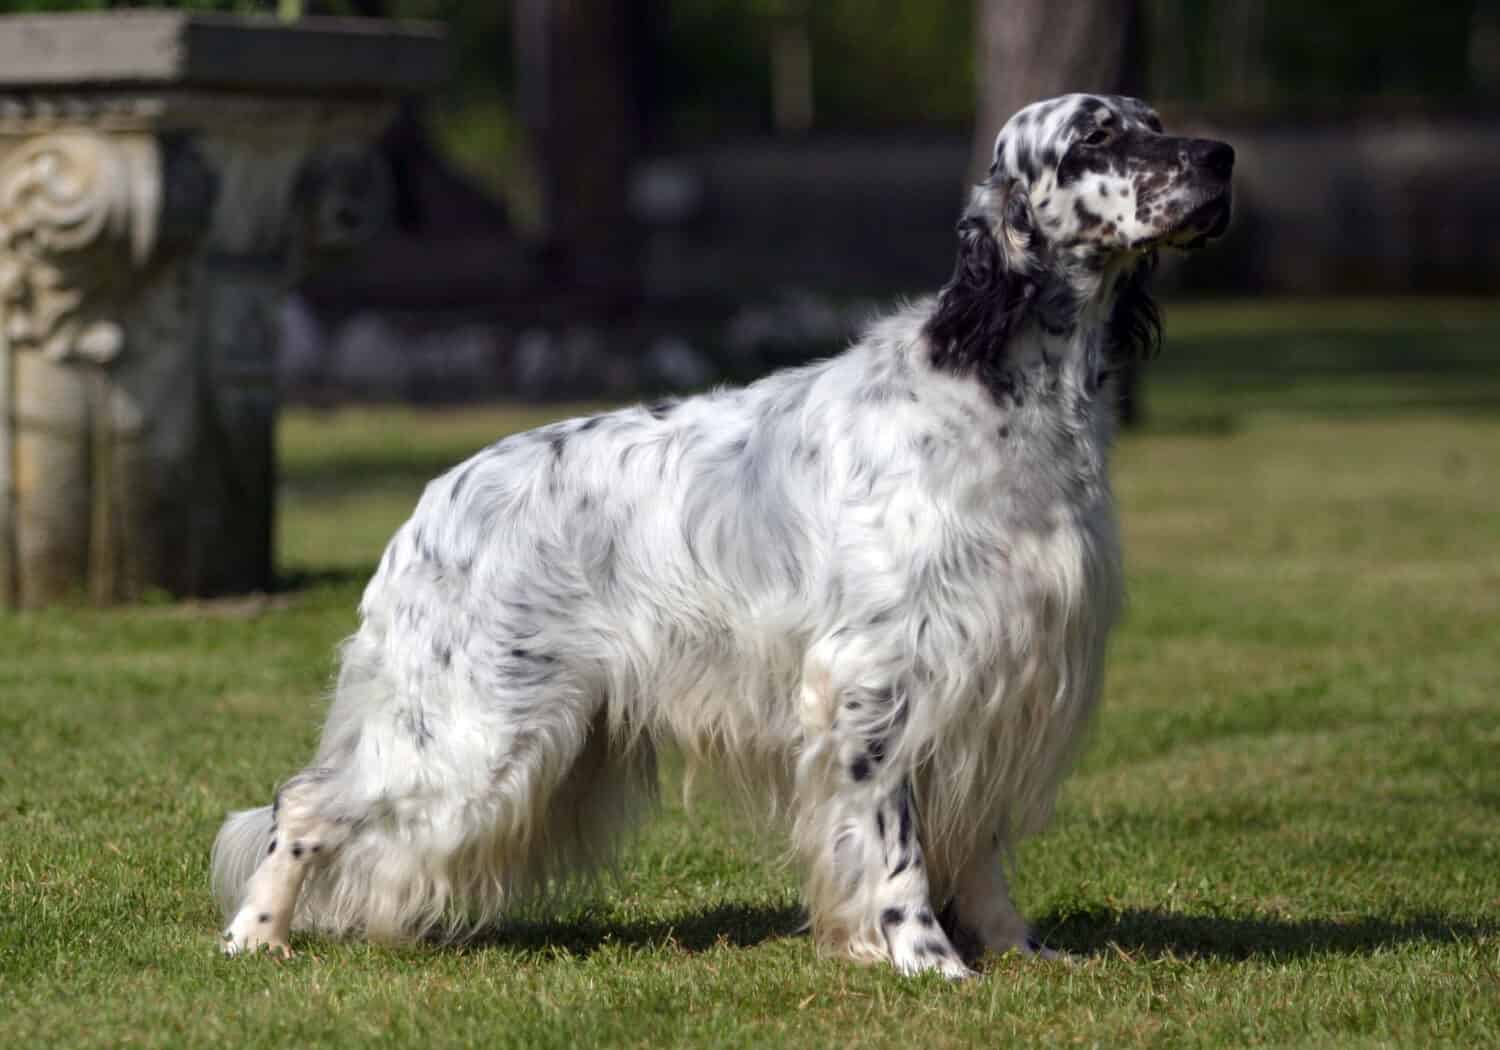 Portrait of an English Setter dog in outdoors.